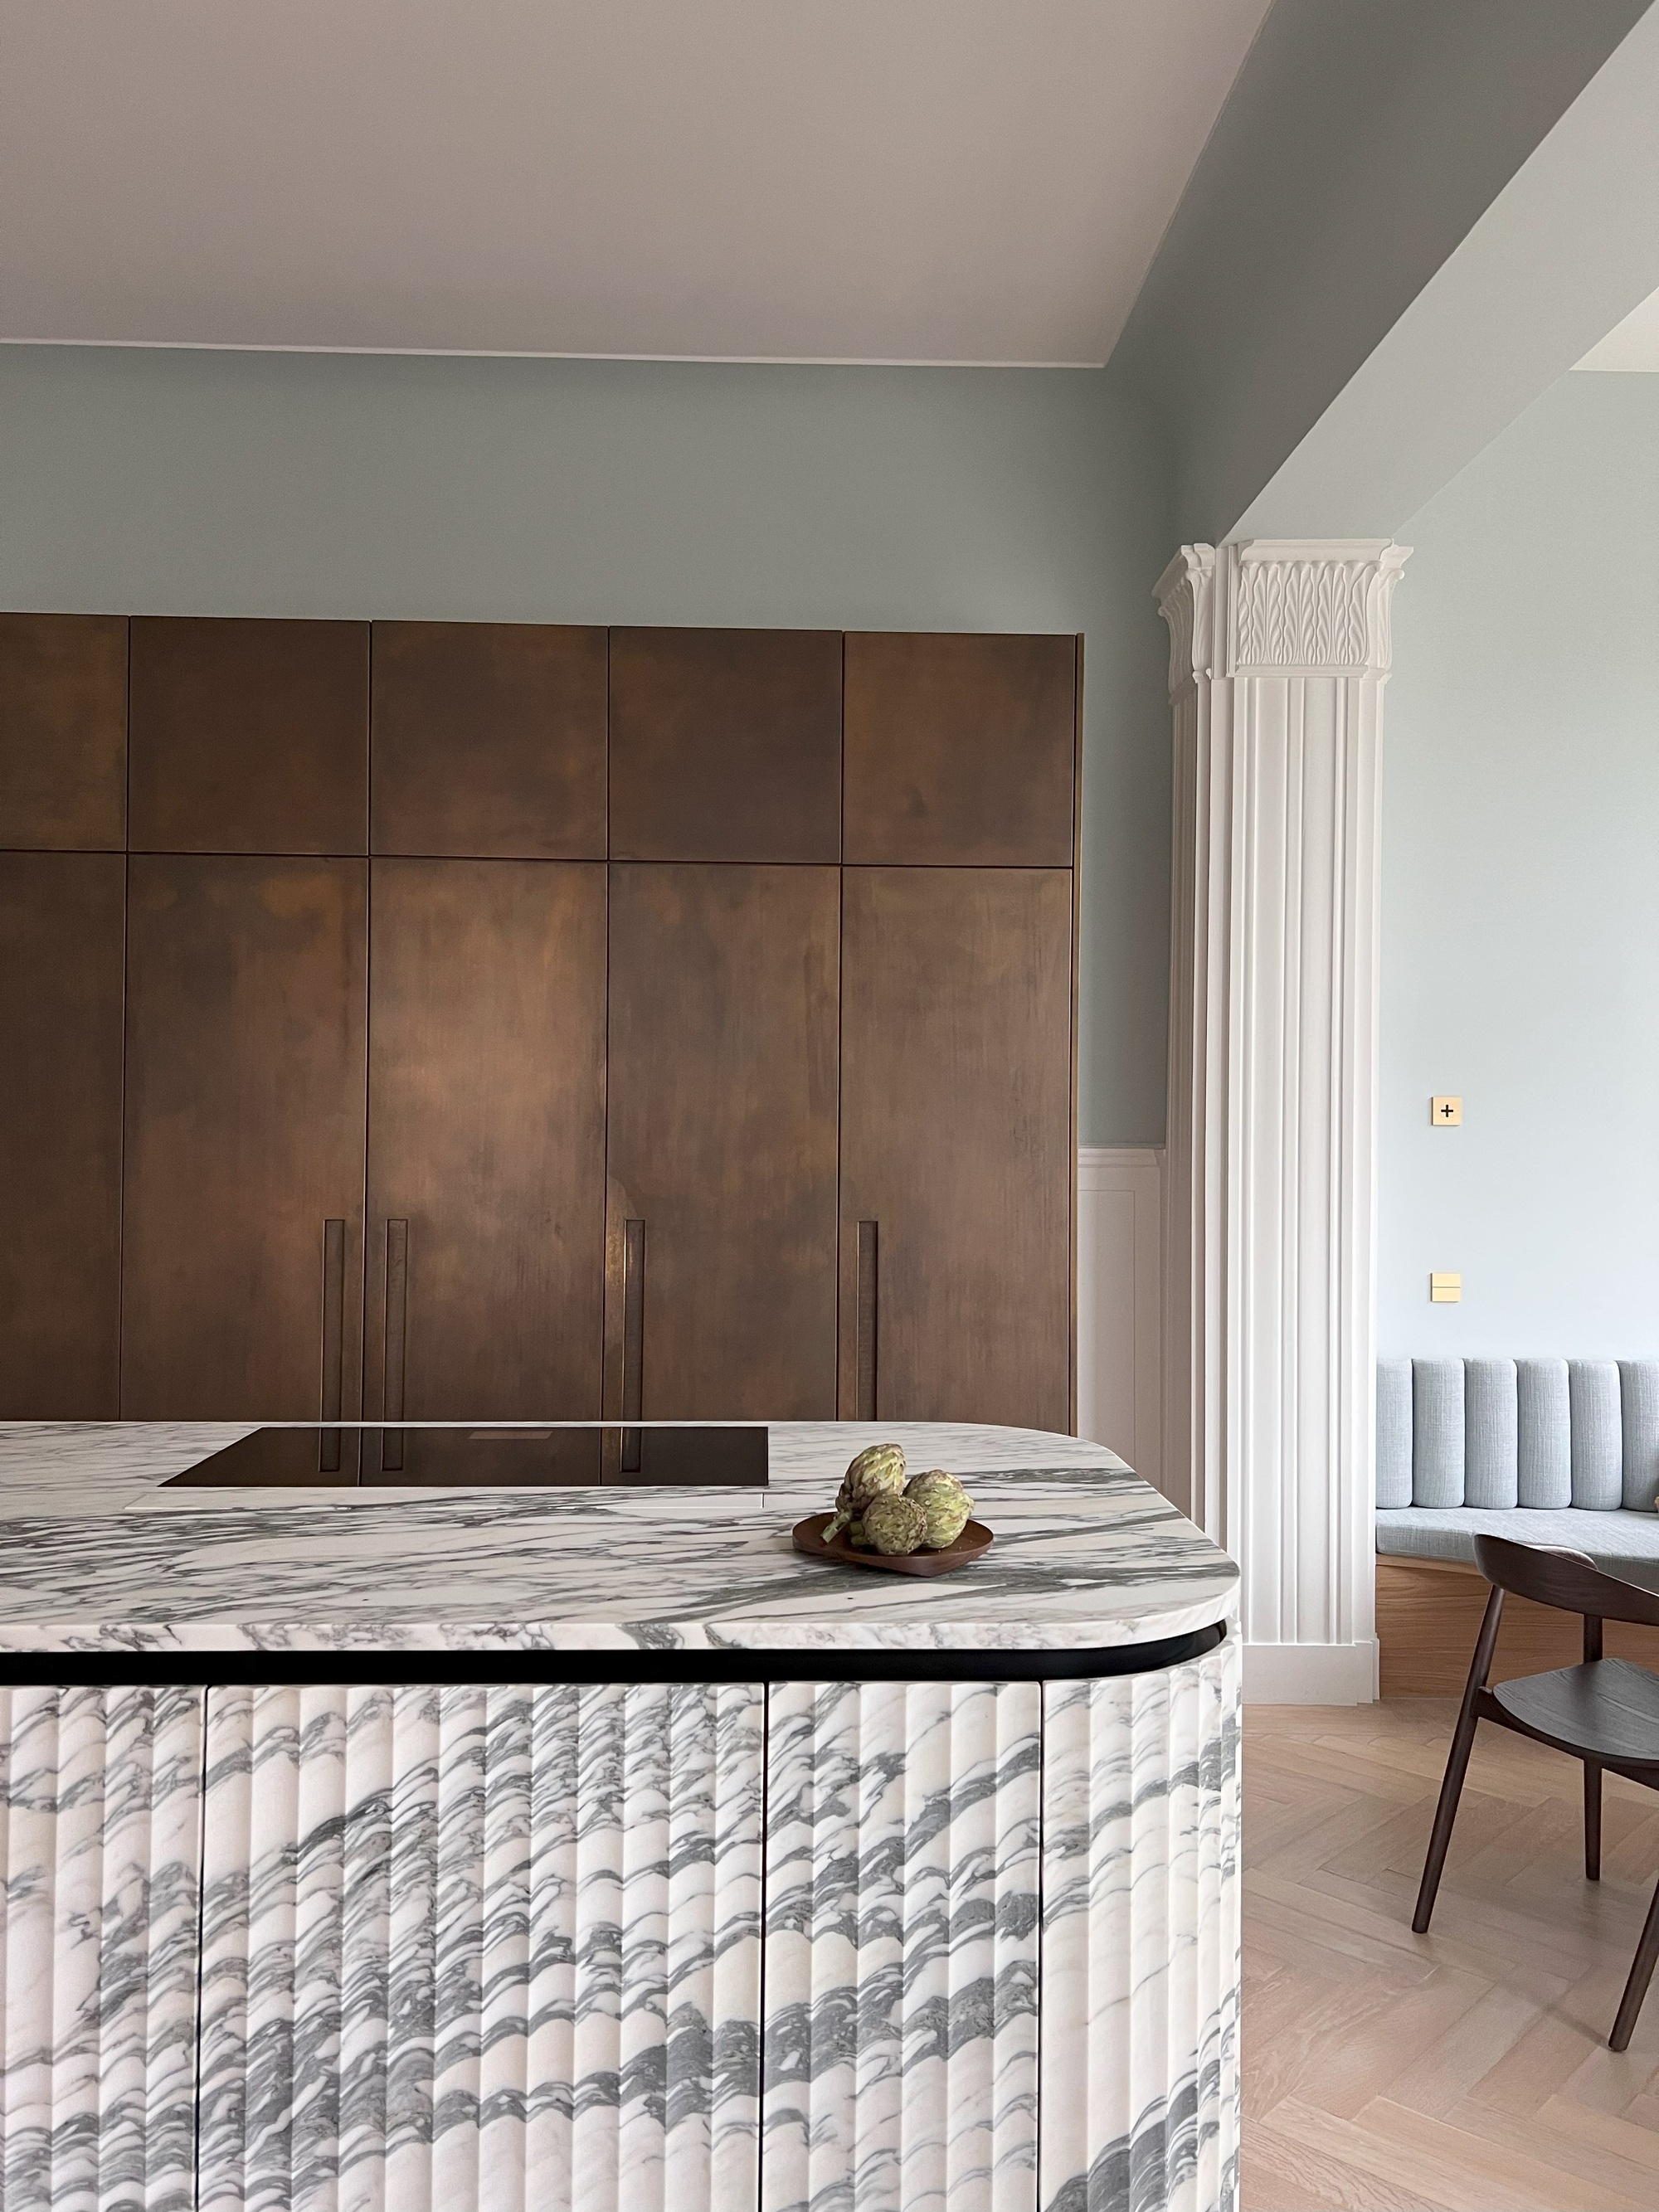 Is this the world's most beautiful kitchen island?